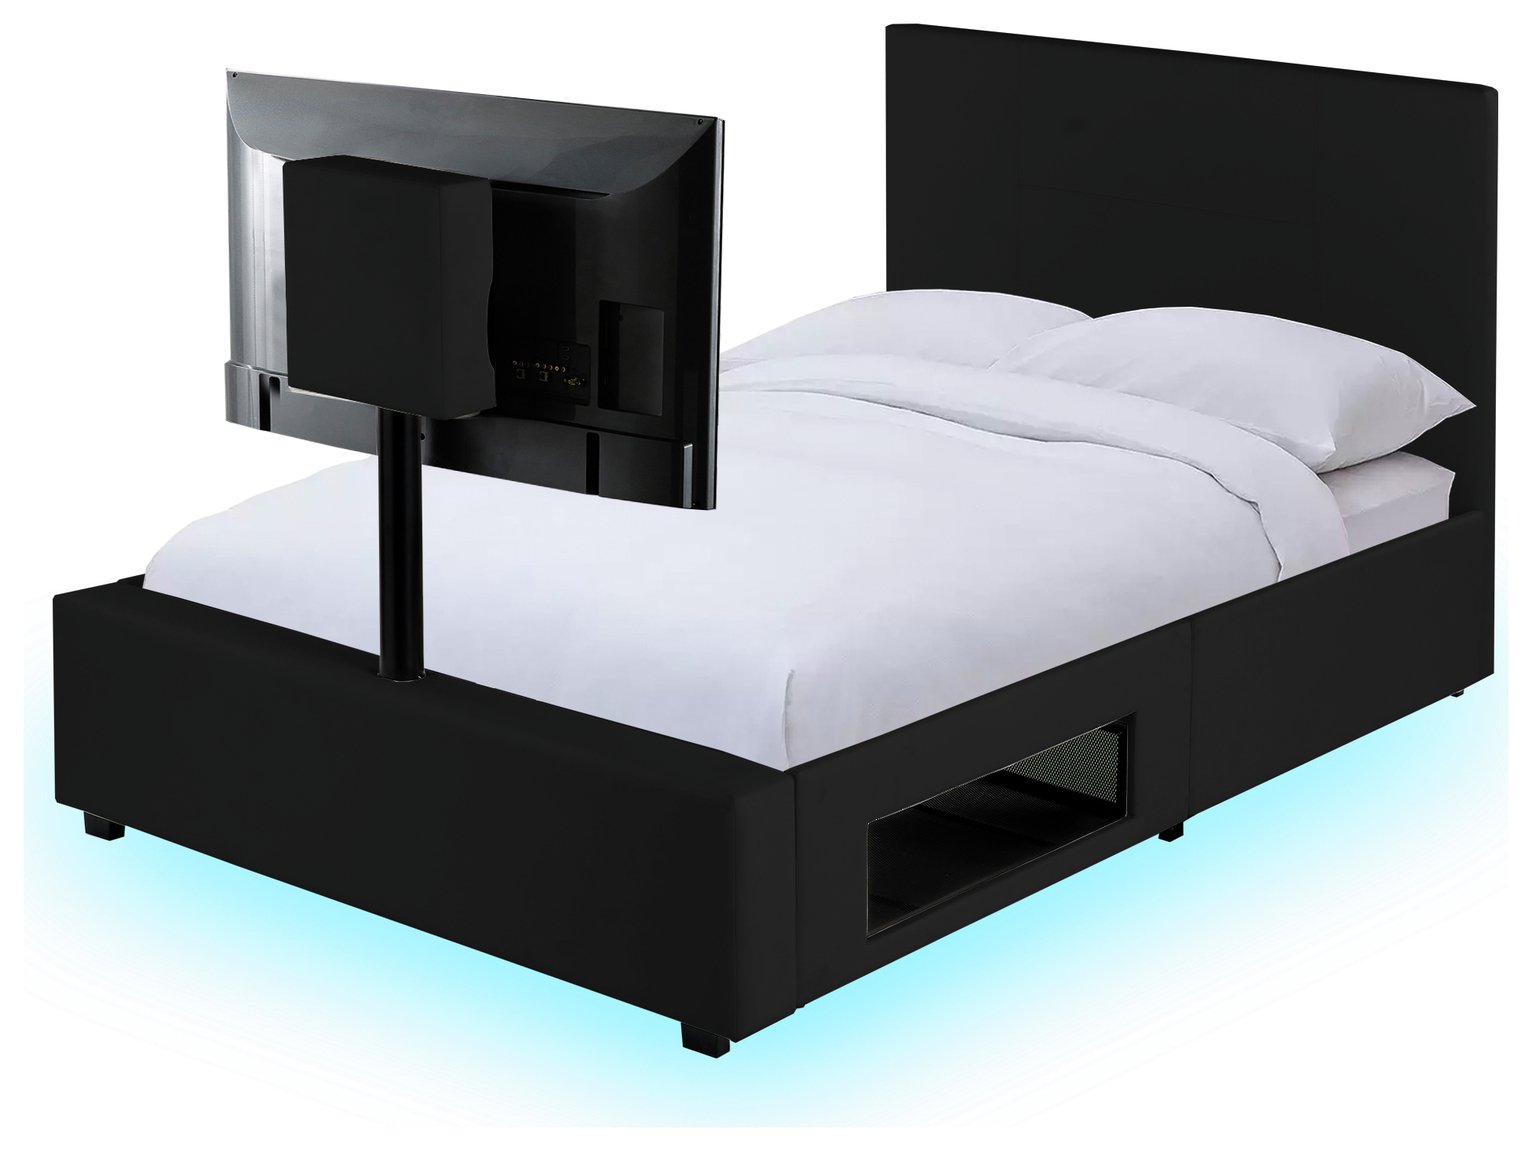 XR Living Ava Small Double TV Gaming Bed Frame - Black